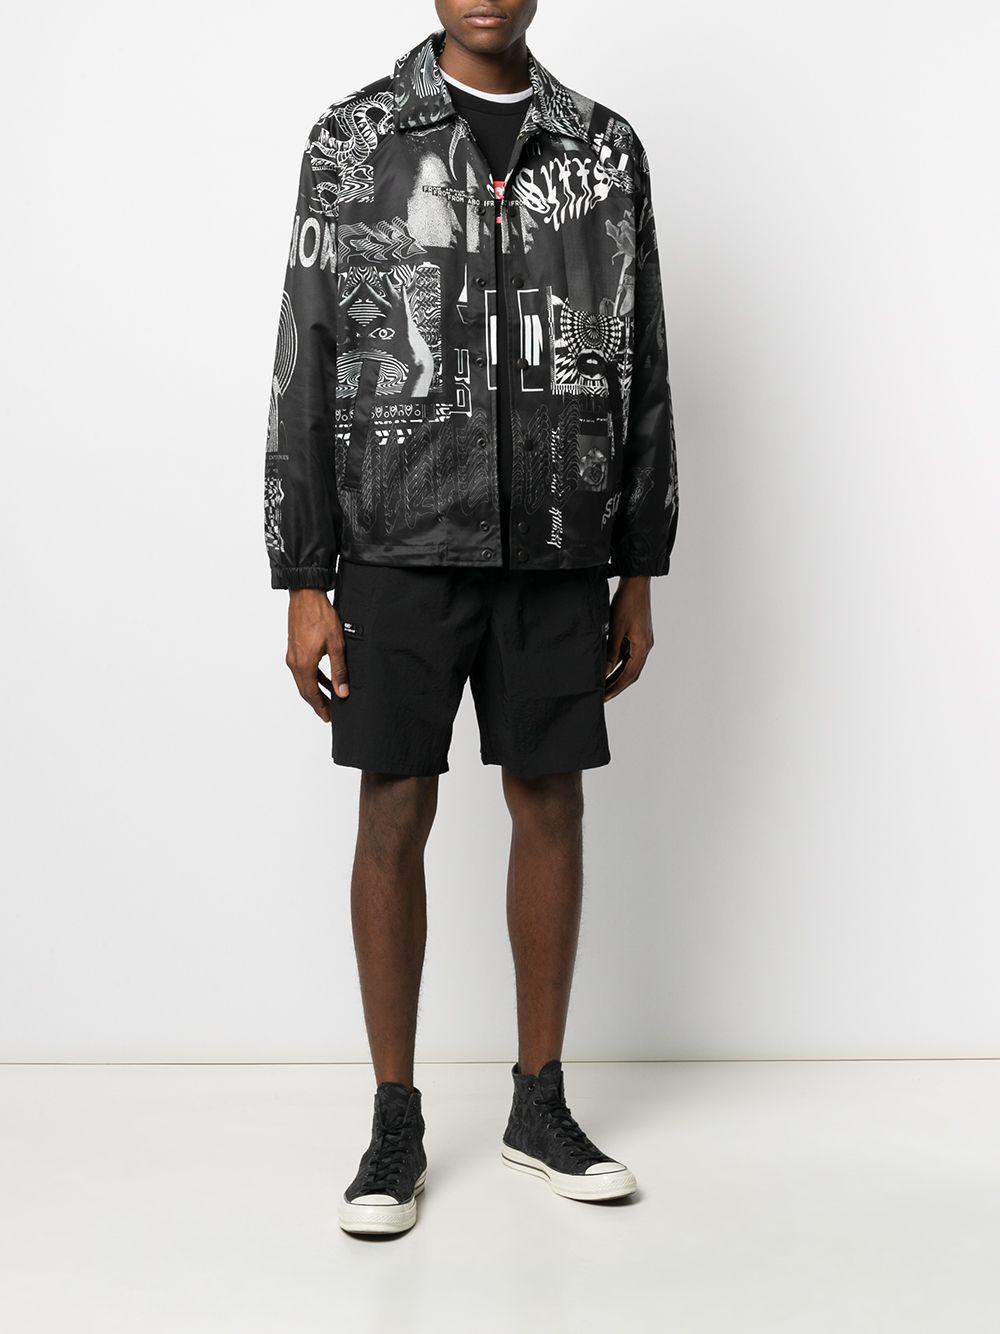 DIESEL Abstract-print Shirt Jacket in Black for Men - Lyst